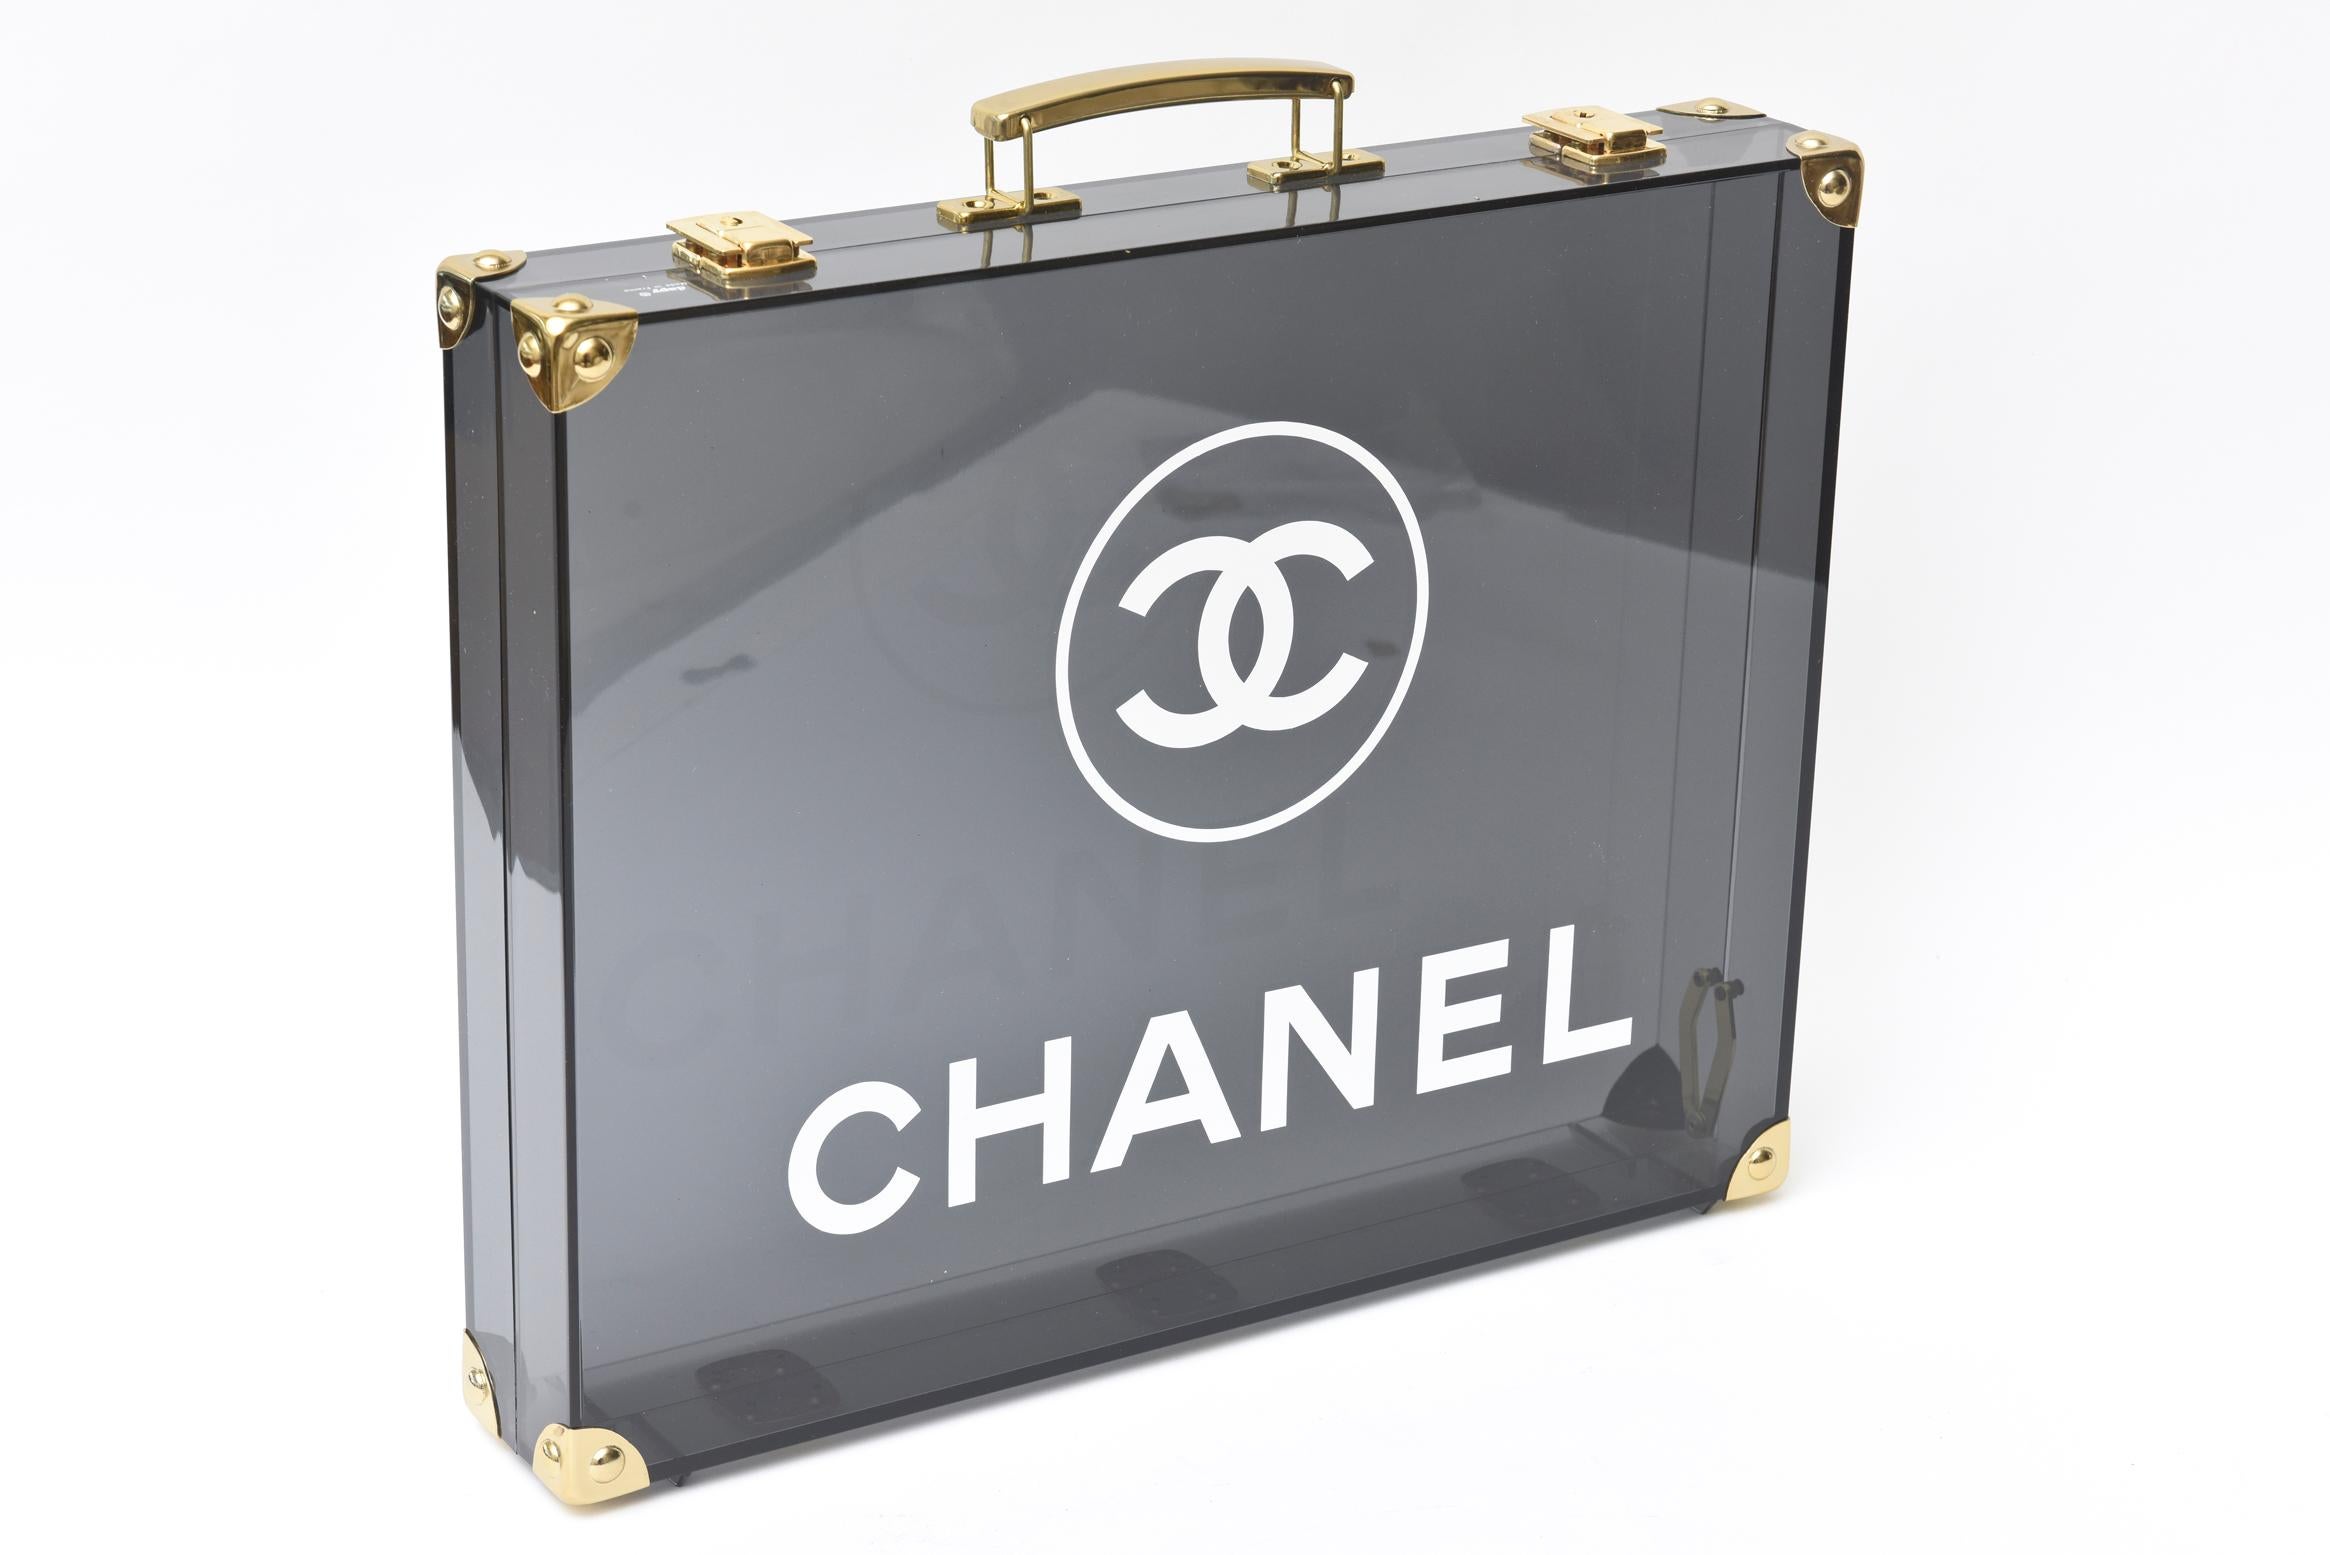 This ever so chic chanel Lucite and brass briefcase from the 1980's was made by Daby. The gray to black gradient lucite is offset against the white Chanel lettering. It was never used and has the original plastic over the case and its original box.